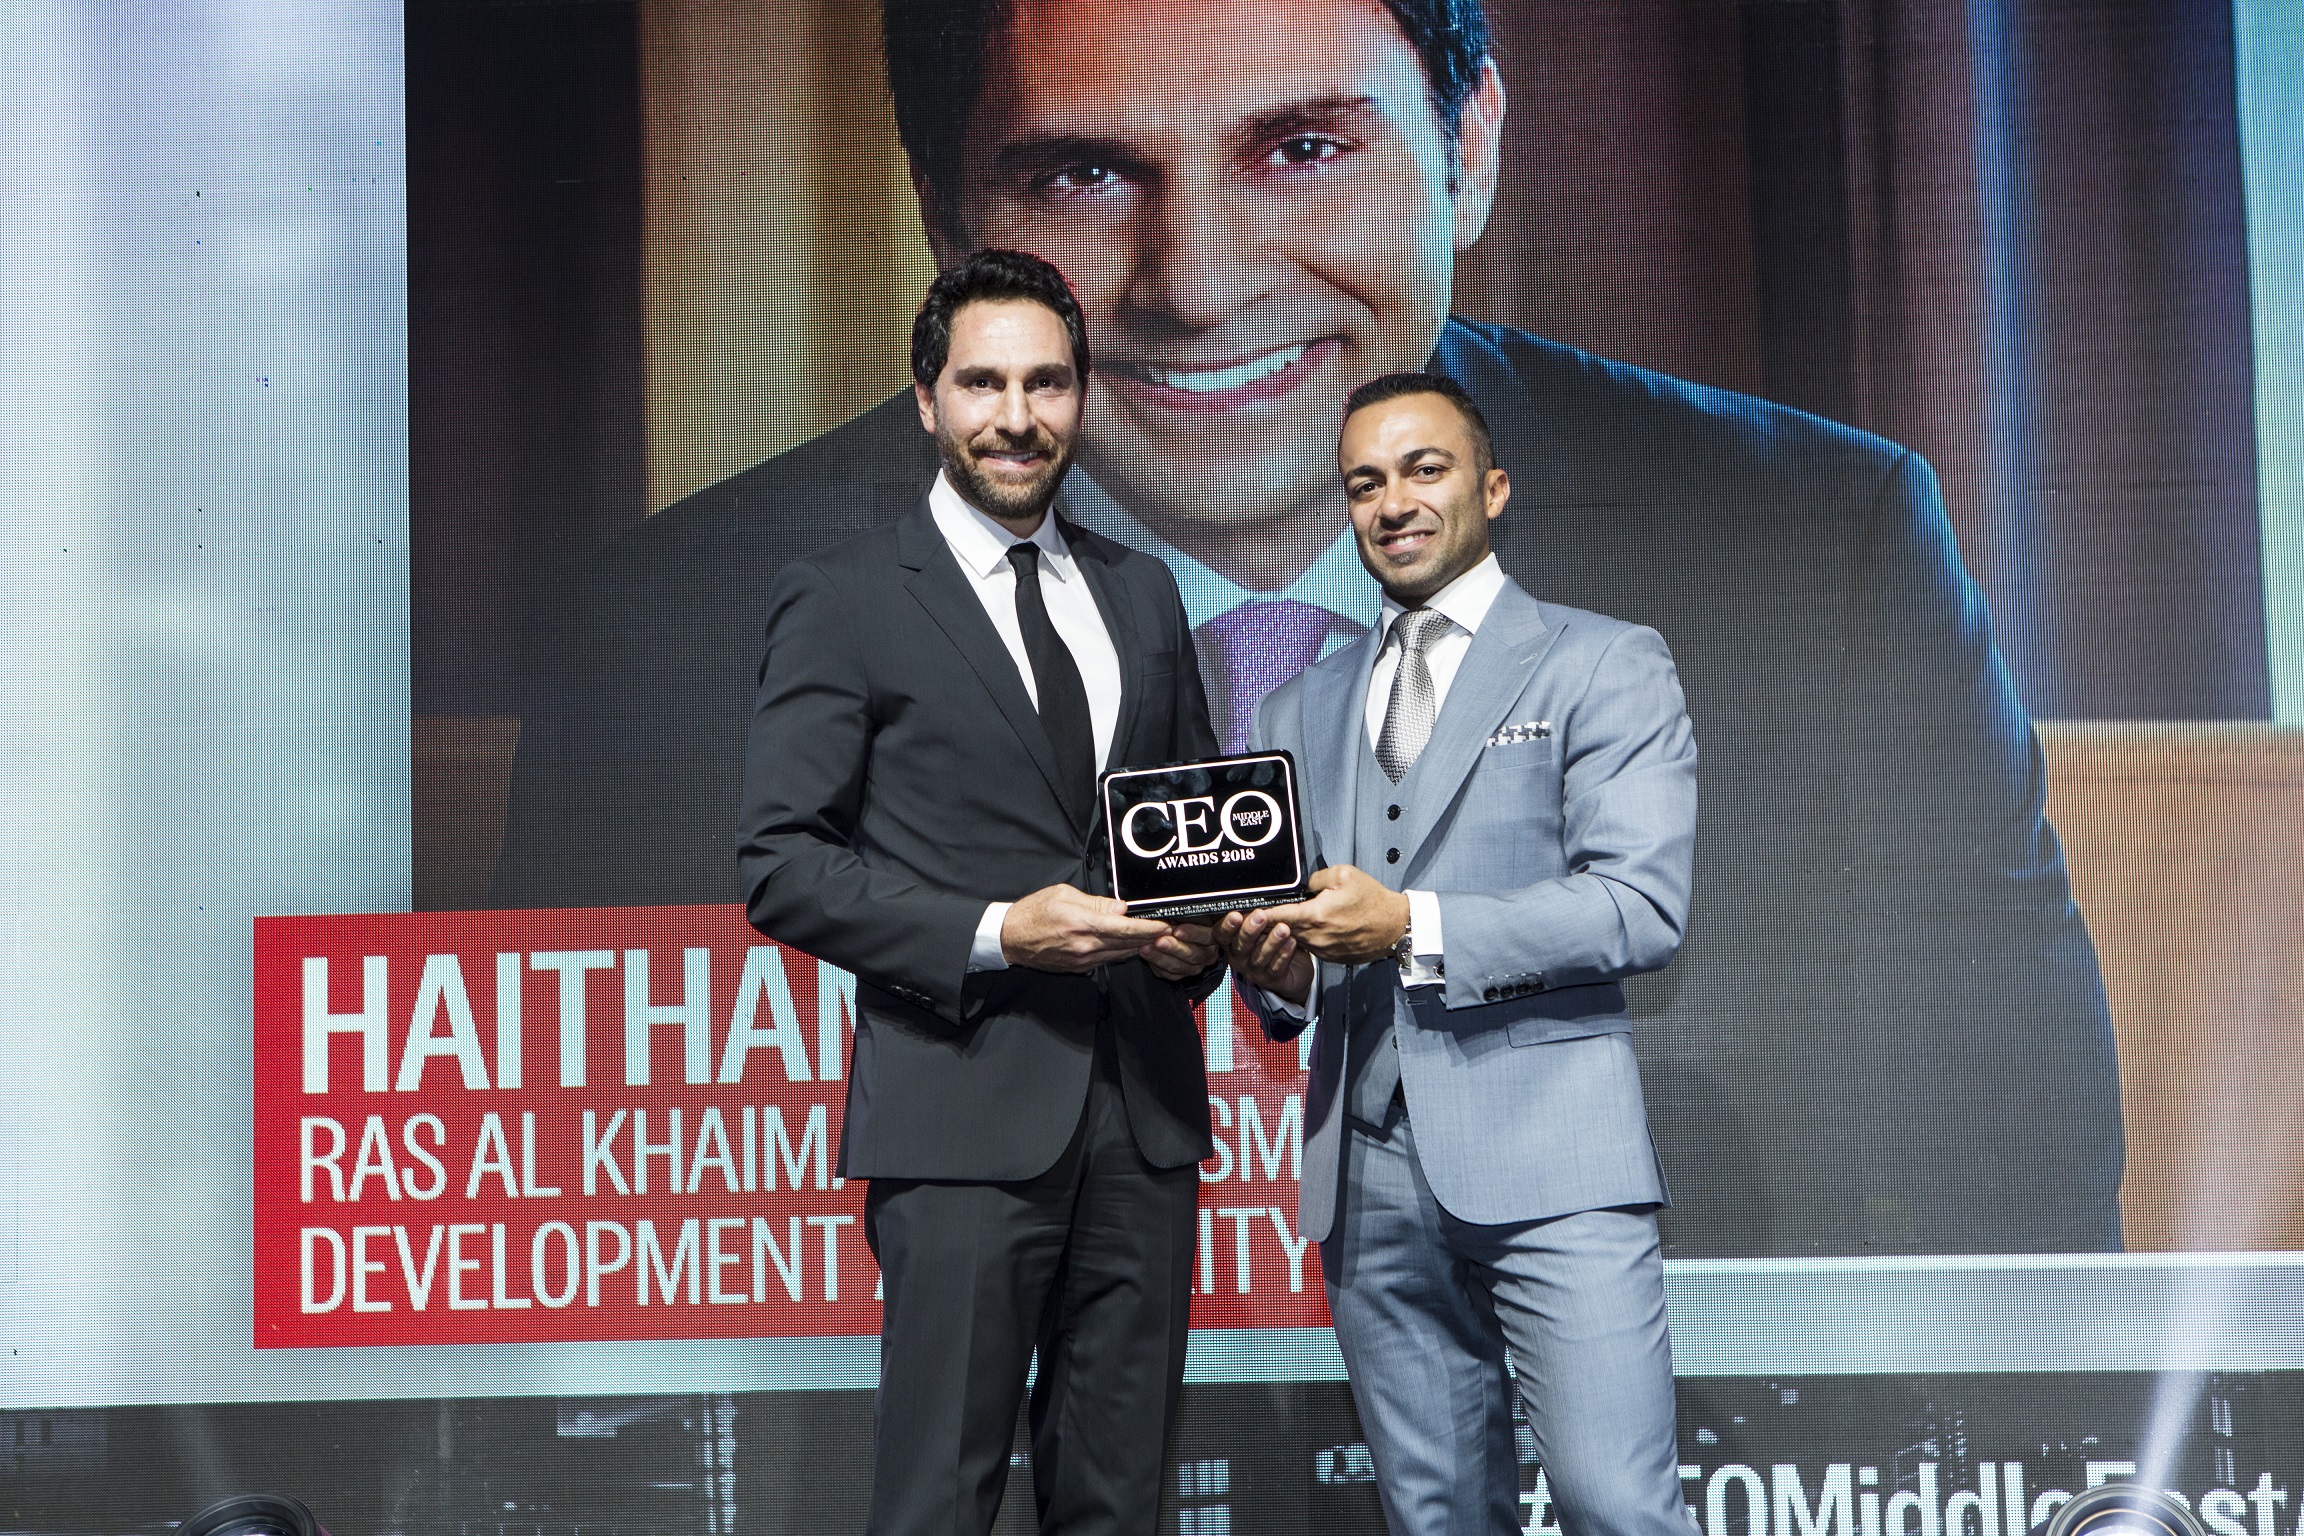 Haitham Mattar Named “Leisure And Tourism CEO Of The Year” At The Prestigious CEO Middle East Awards 2018